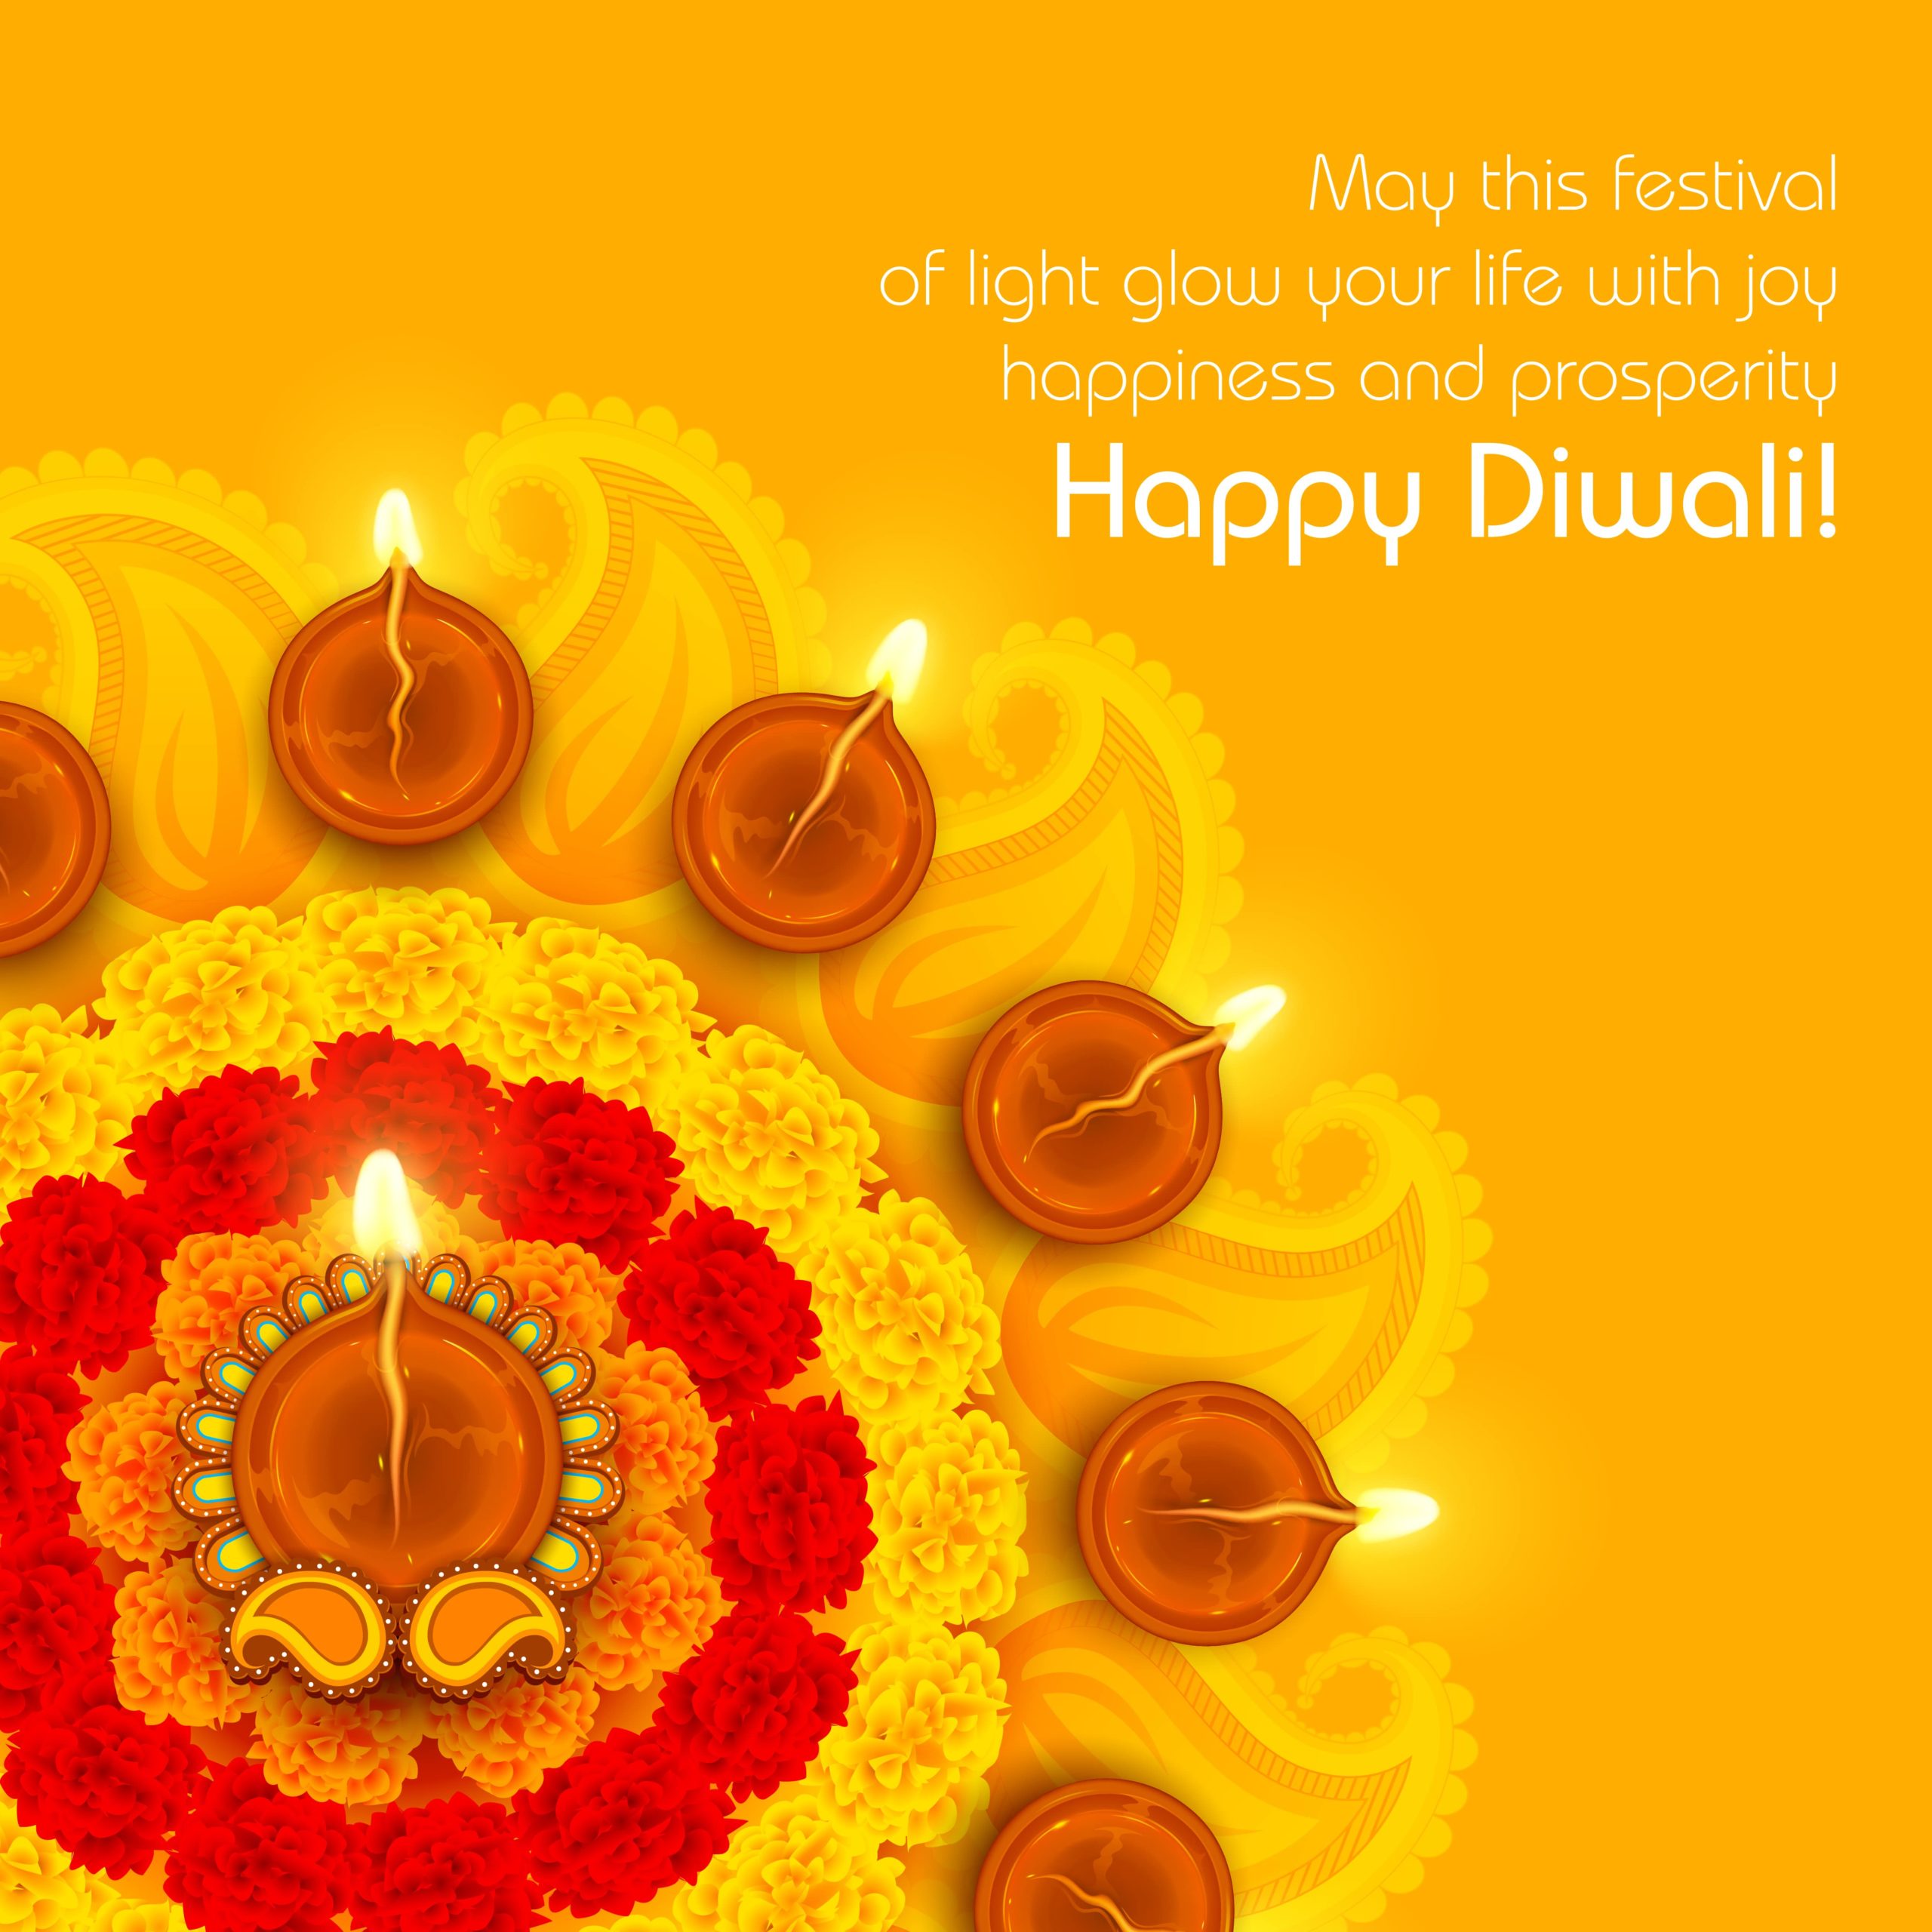 happy diwali 2021 wishes and images